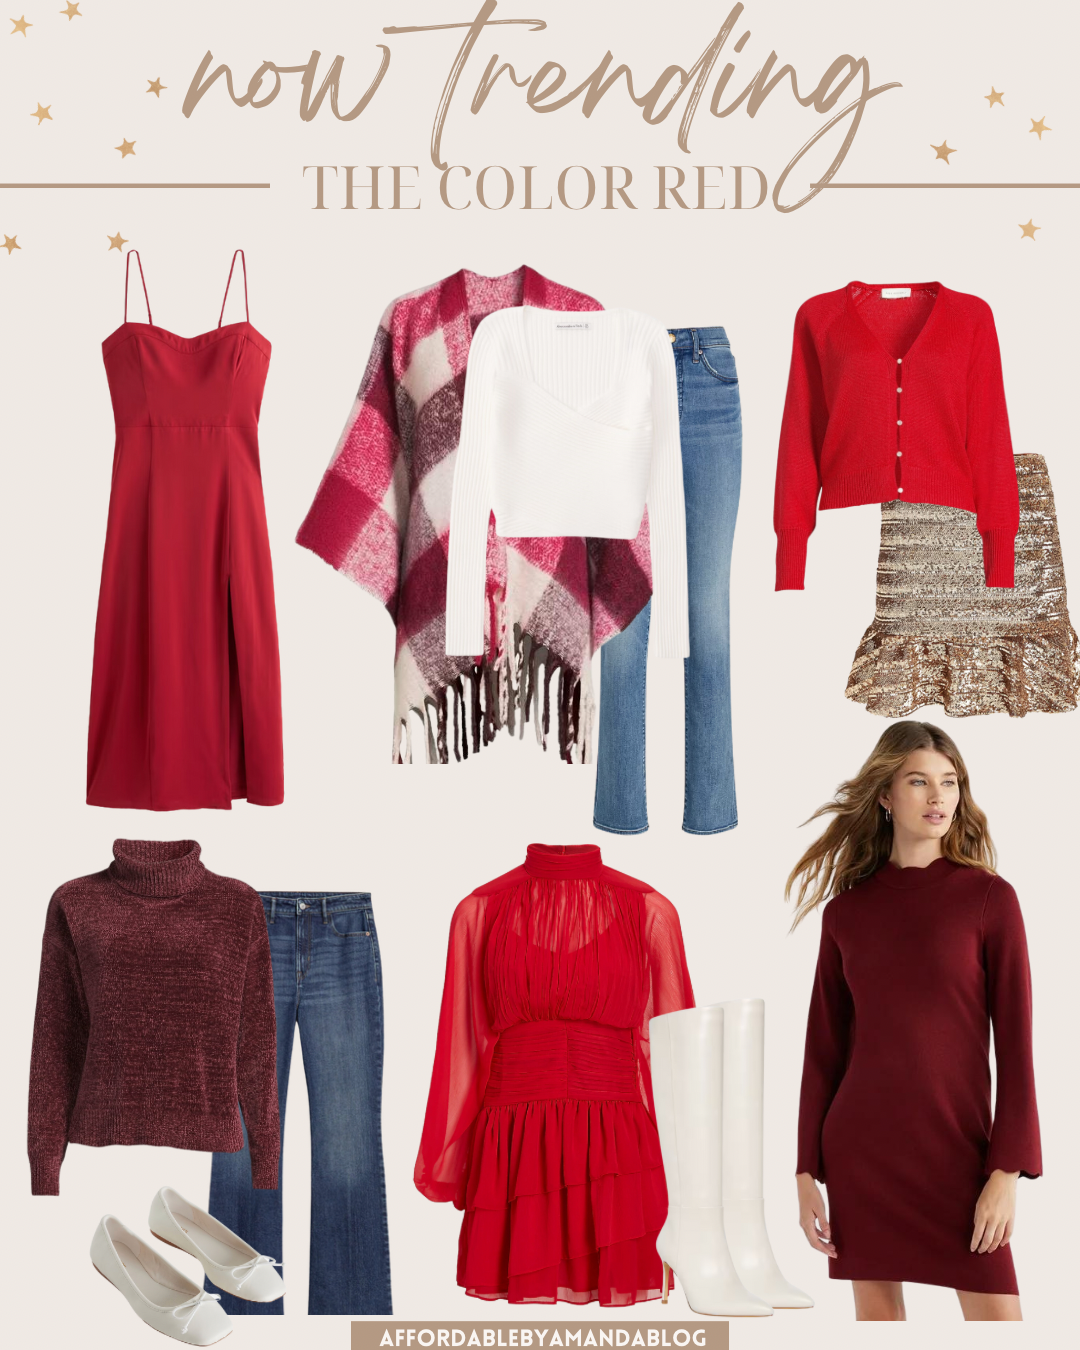 The Color Red Trend for Winter 2023